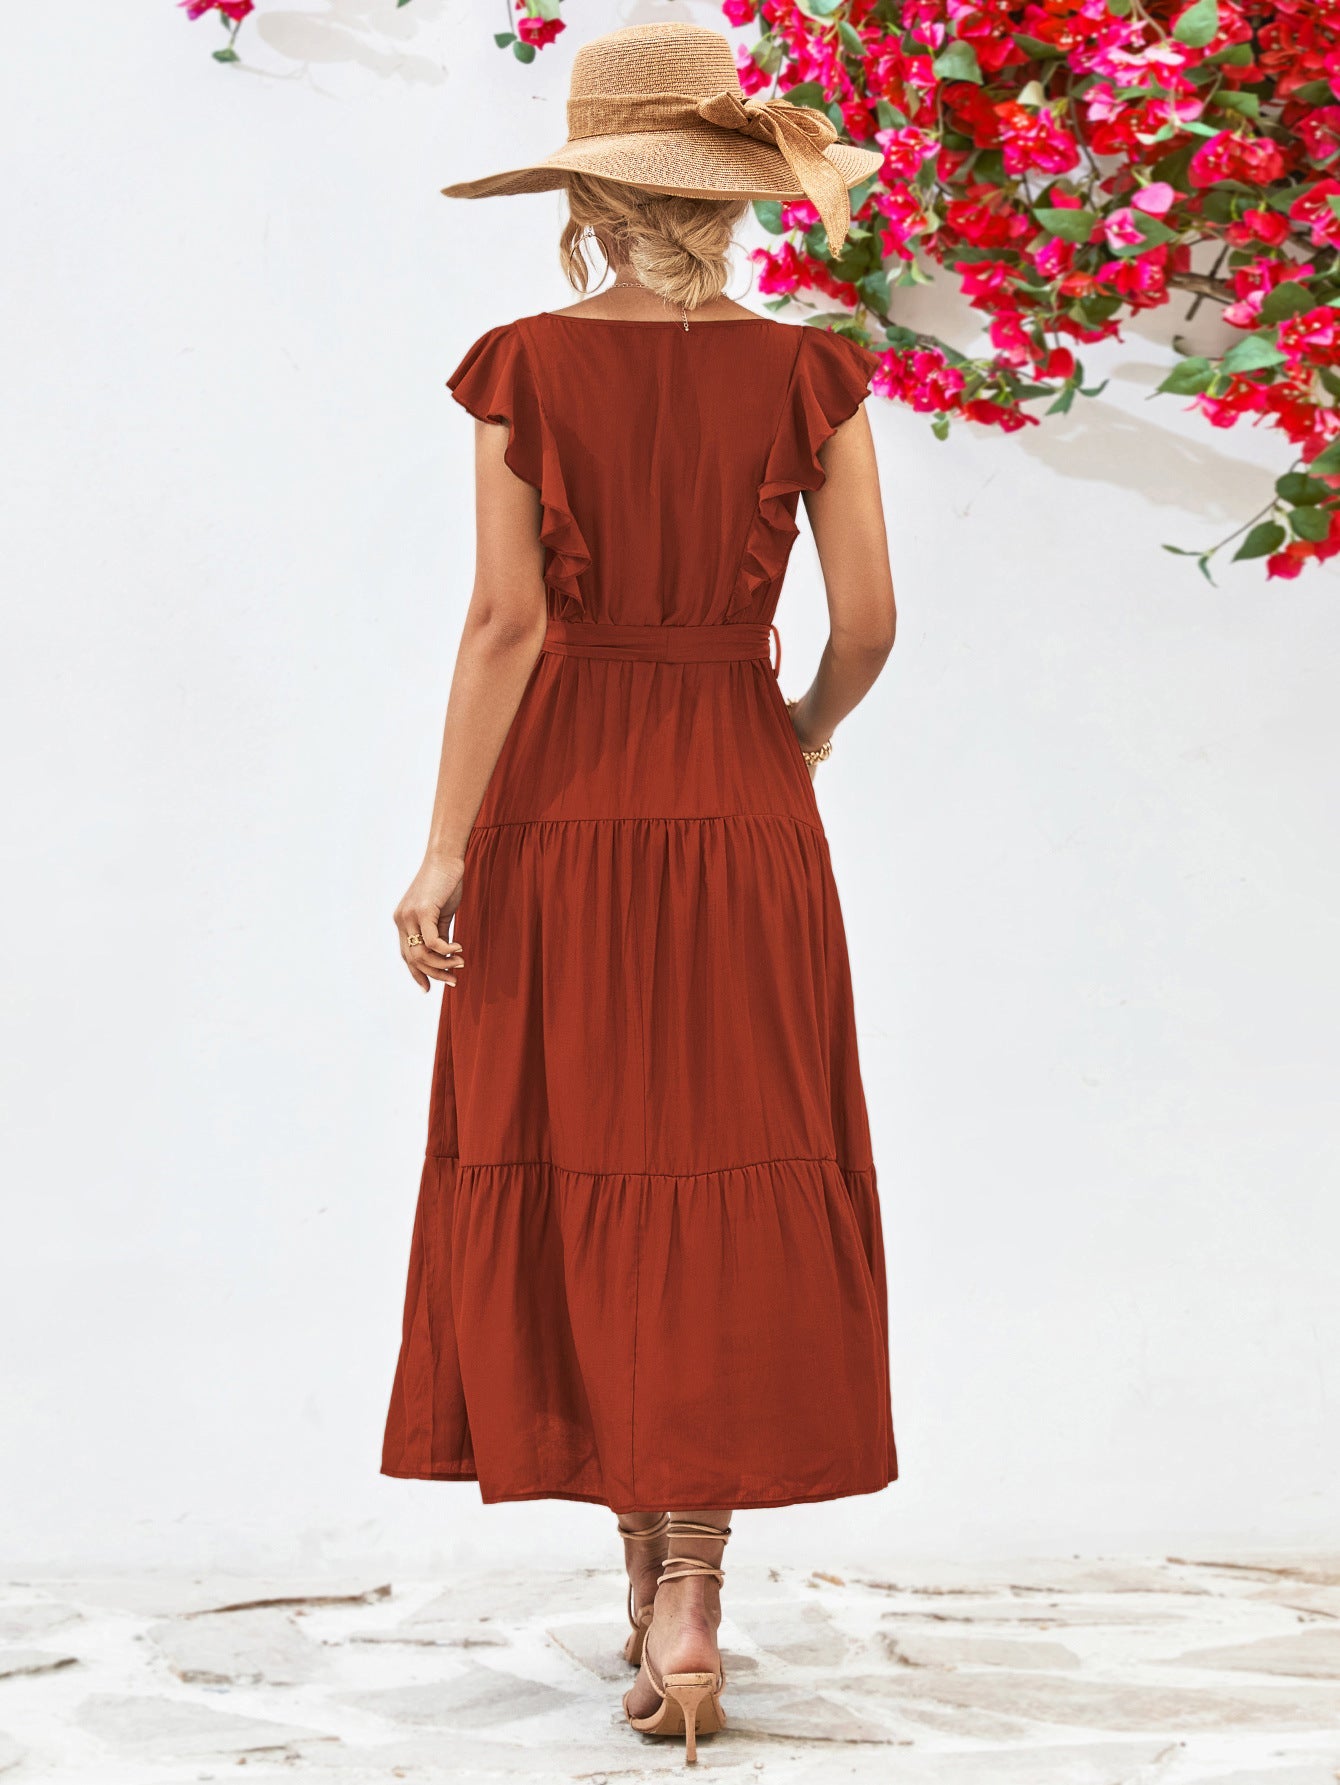 Tie Belt Ruffled Tiered Dress The Stout Steer